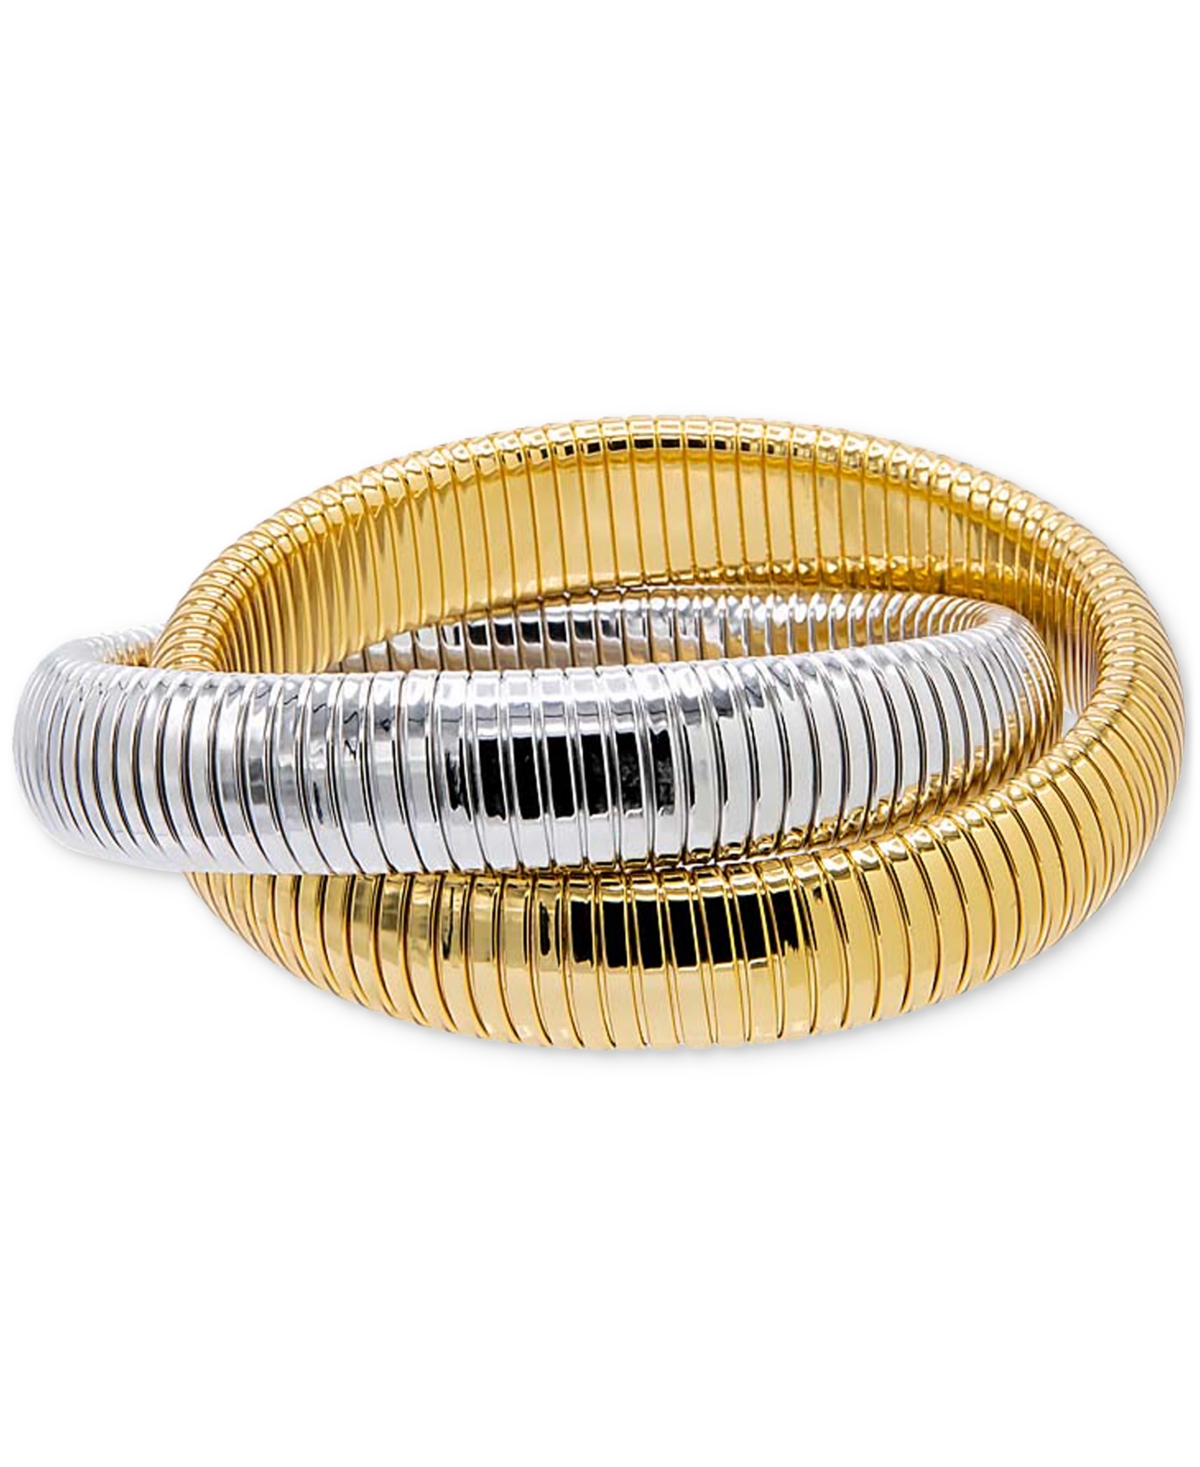 By Adina Eden Chunky Intertwined Snake Chain Bracelet In Two-tone